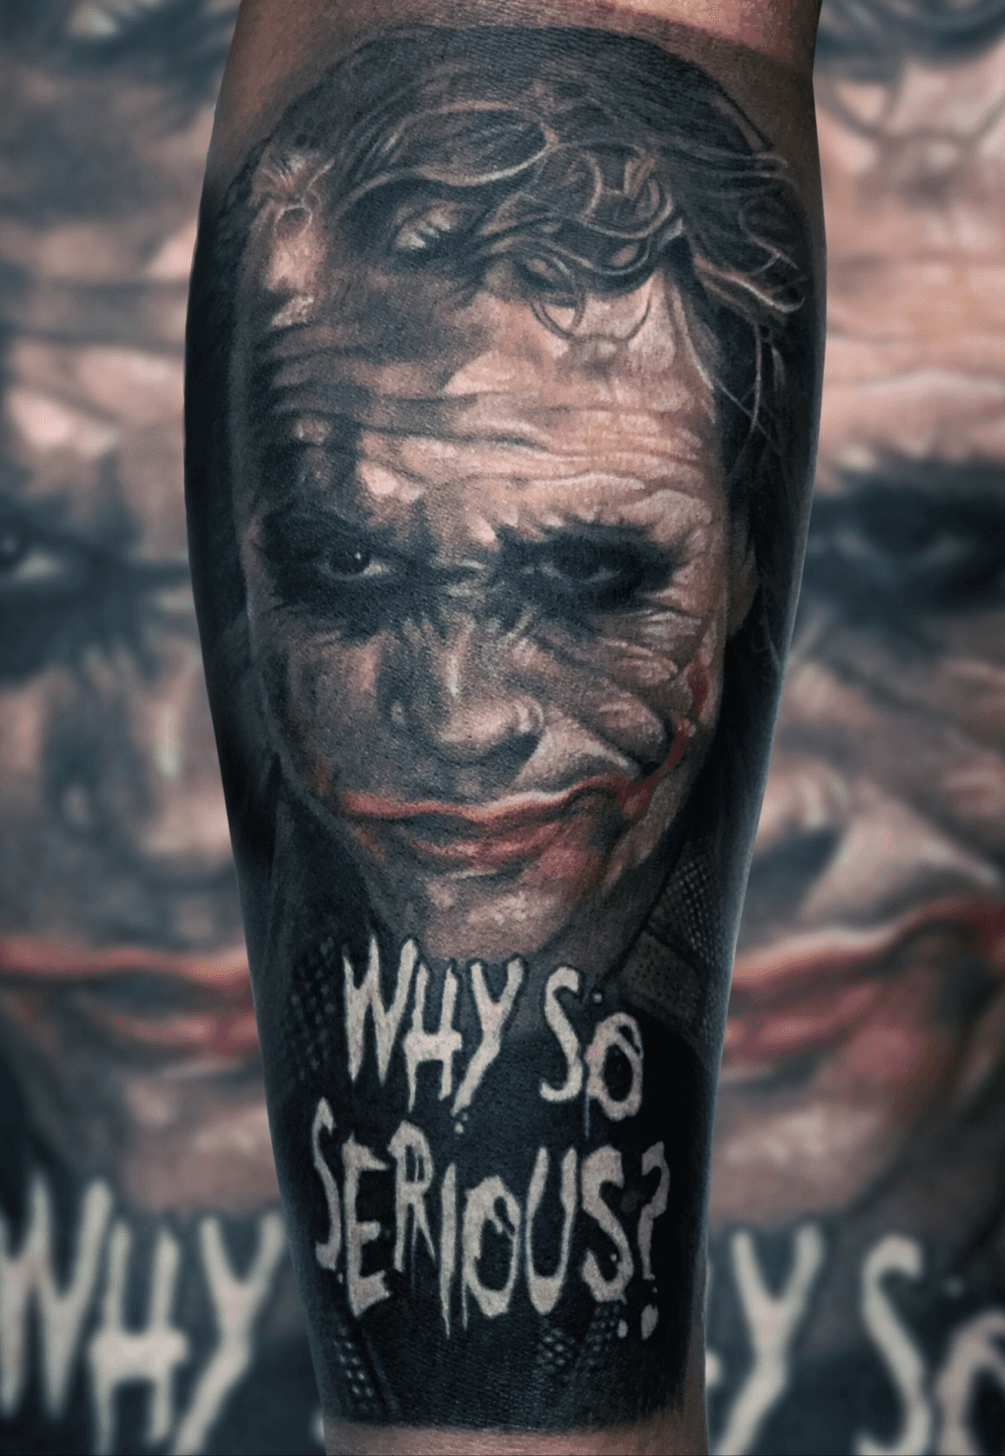 Joker Sleeve Tattoo Designs Ideas and Meaning  Tattoos For You